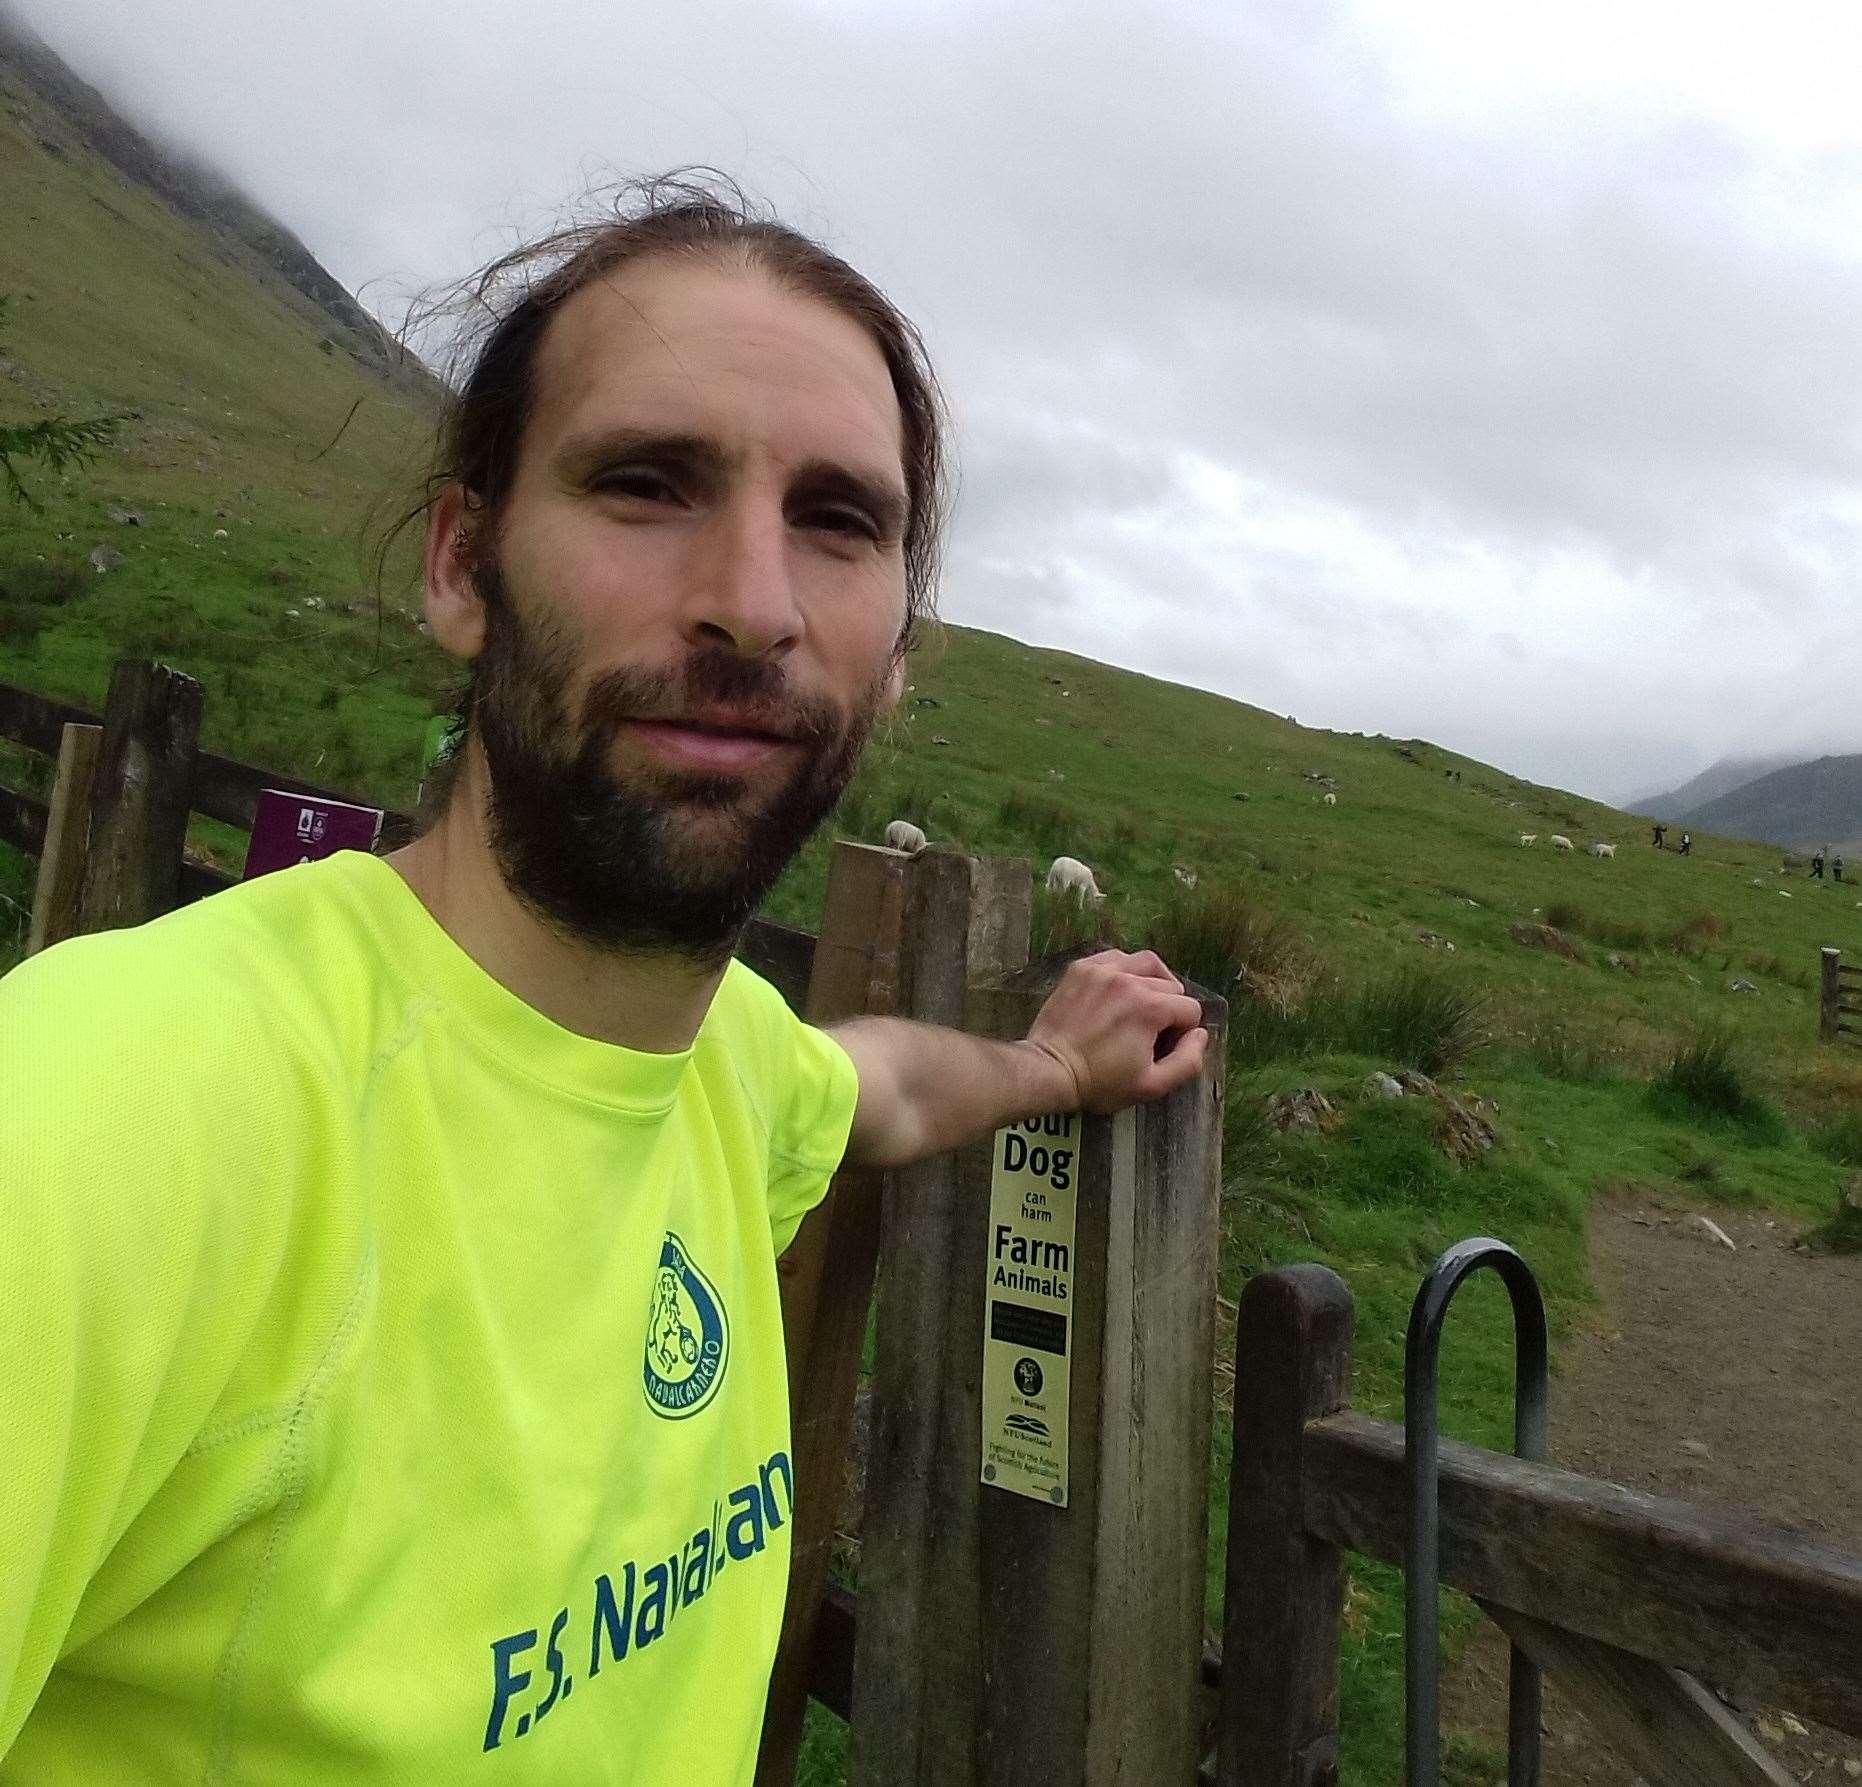 Javi Cabrera Valdes completed the Ben Nevis route seven times from Ben Inn car park to the summit up and down to the tourist path in 24 hours.